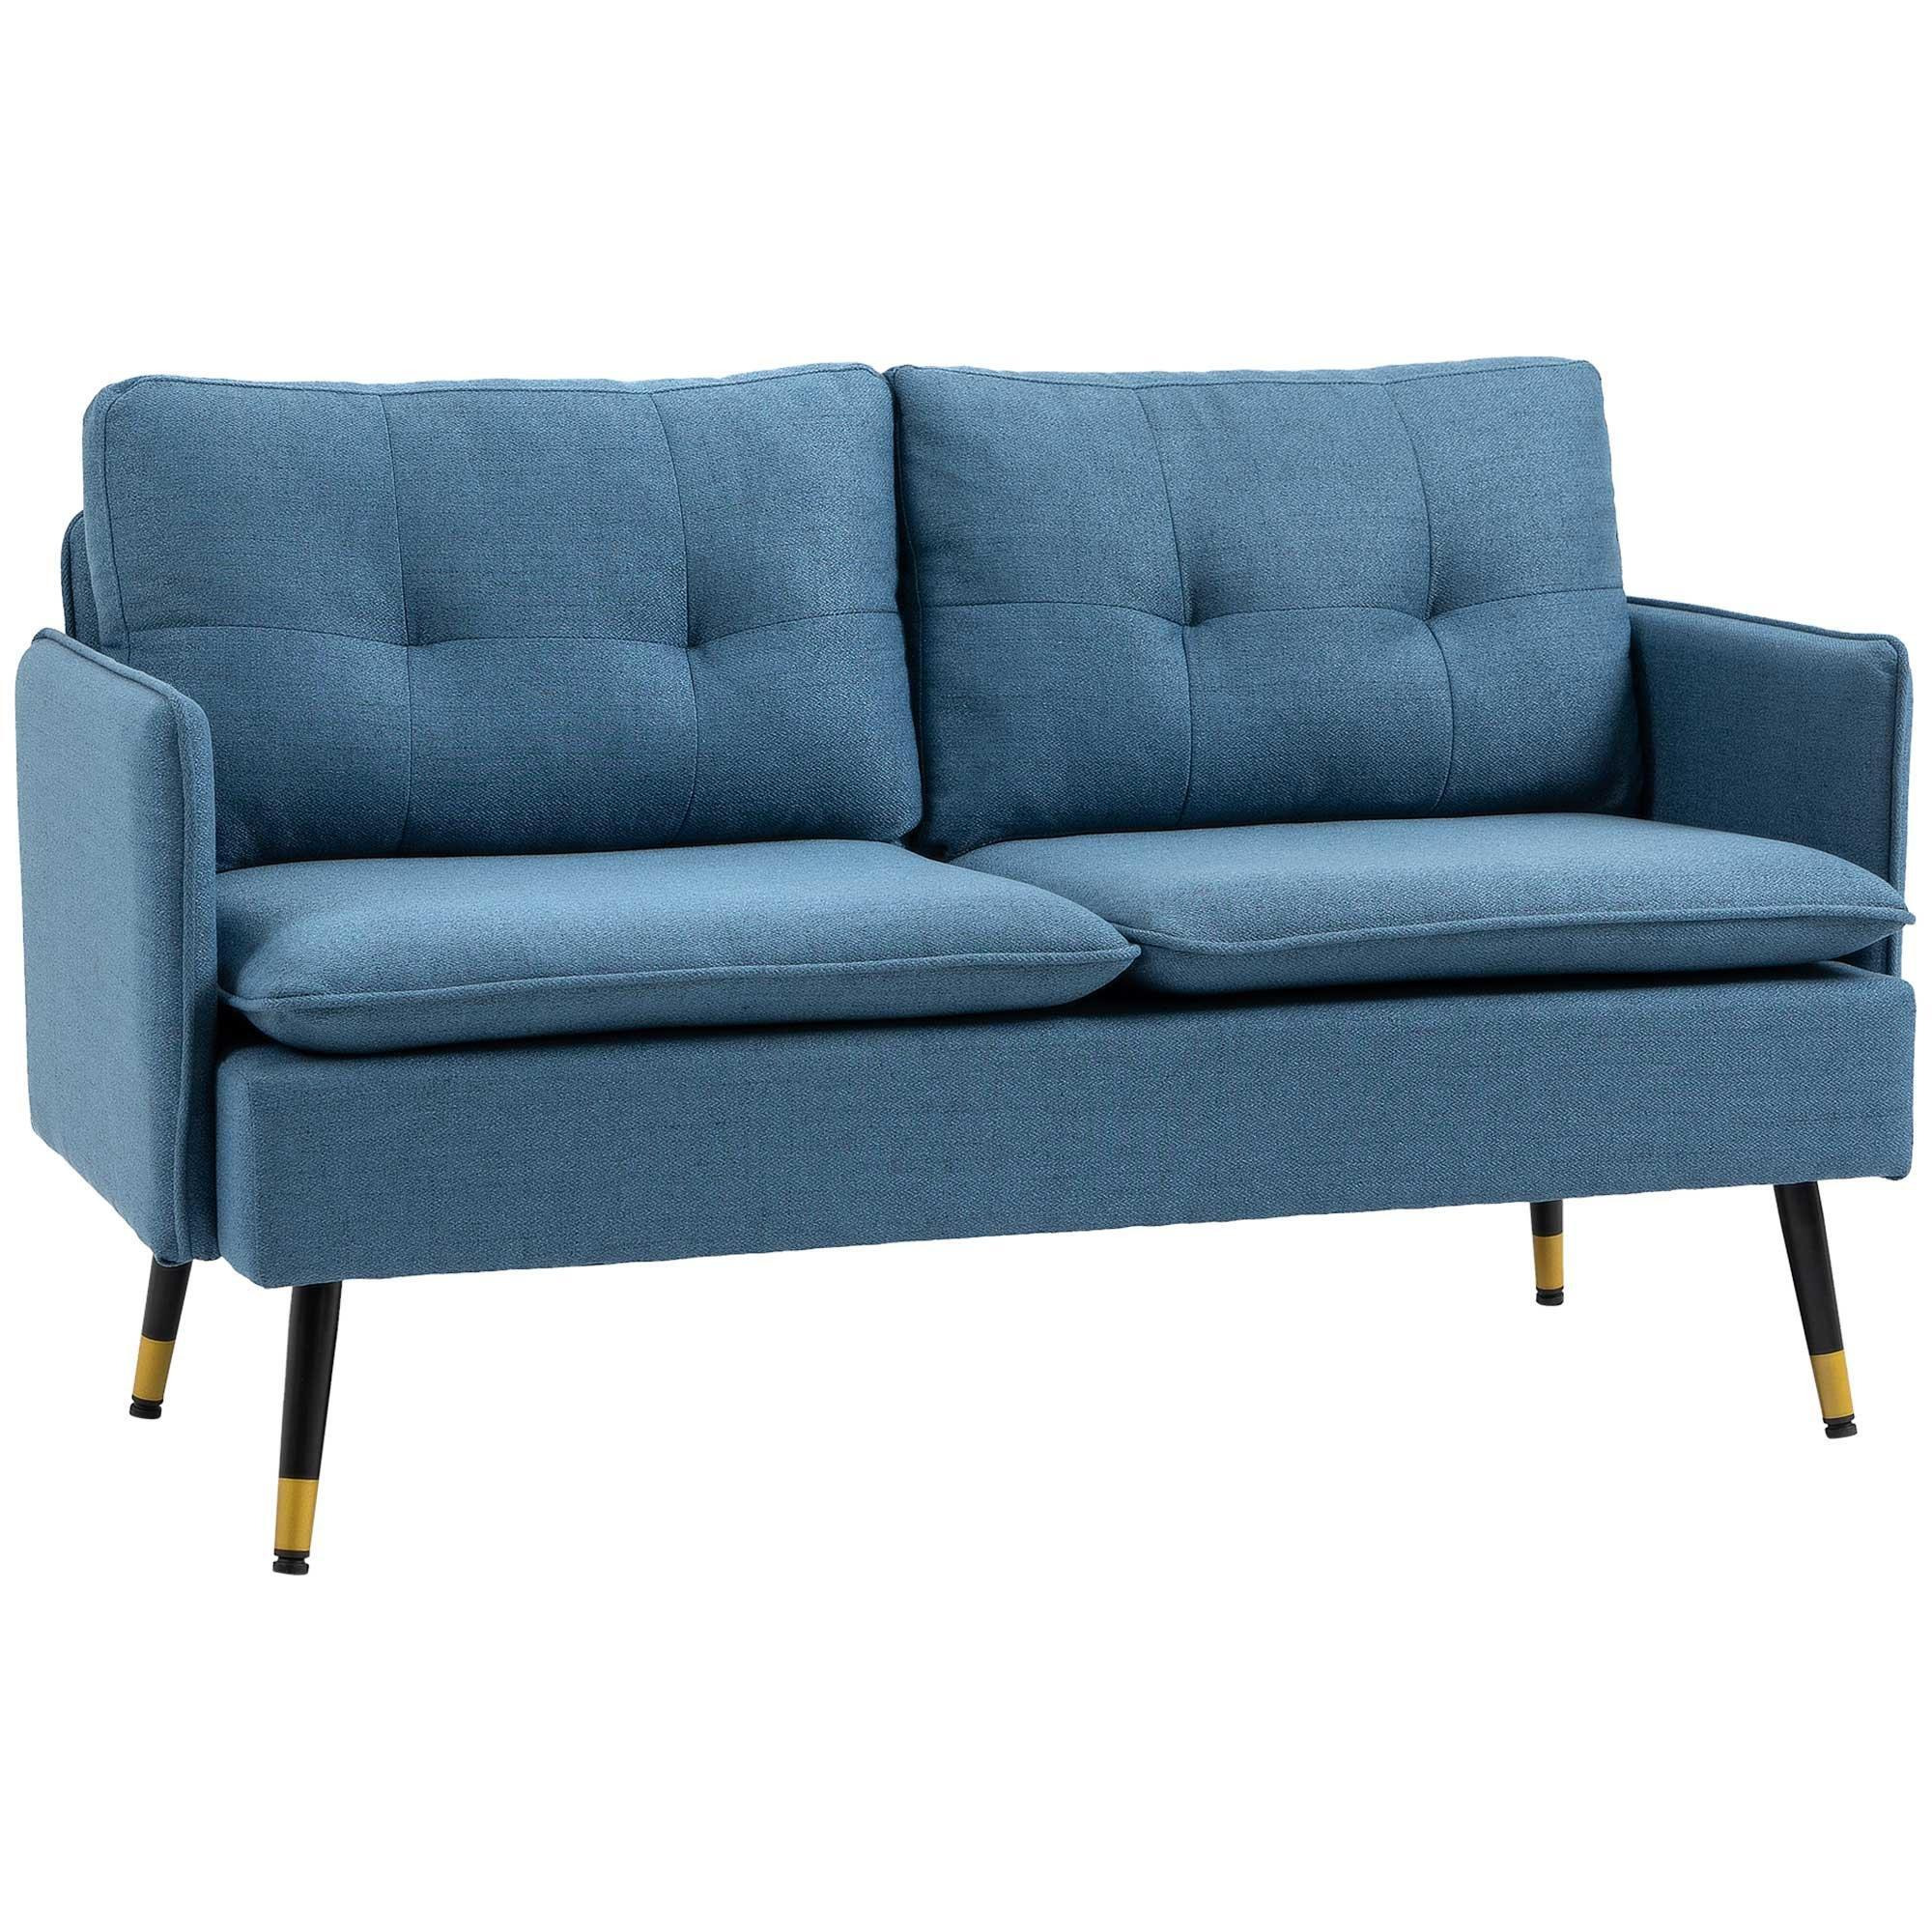 Two Seater Sofa with Steel Legs Button Tufted Backrest for Living Room - image 1